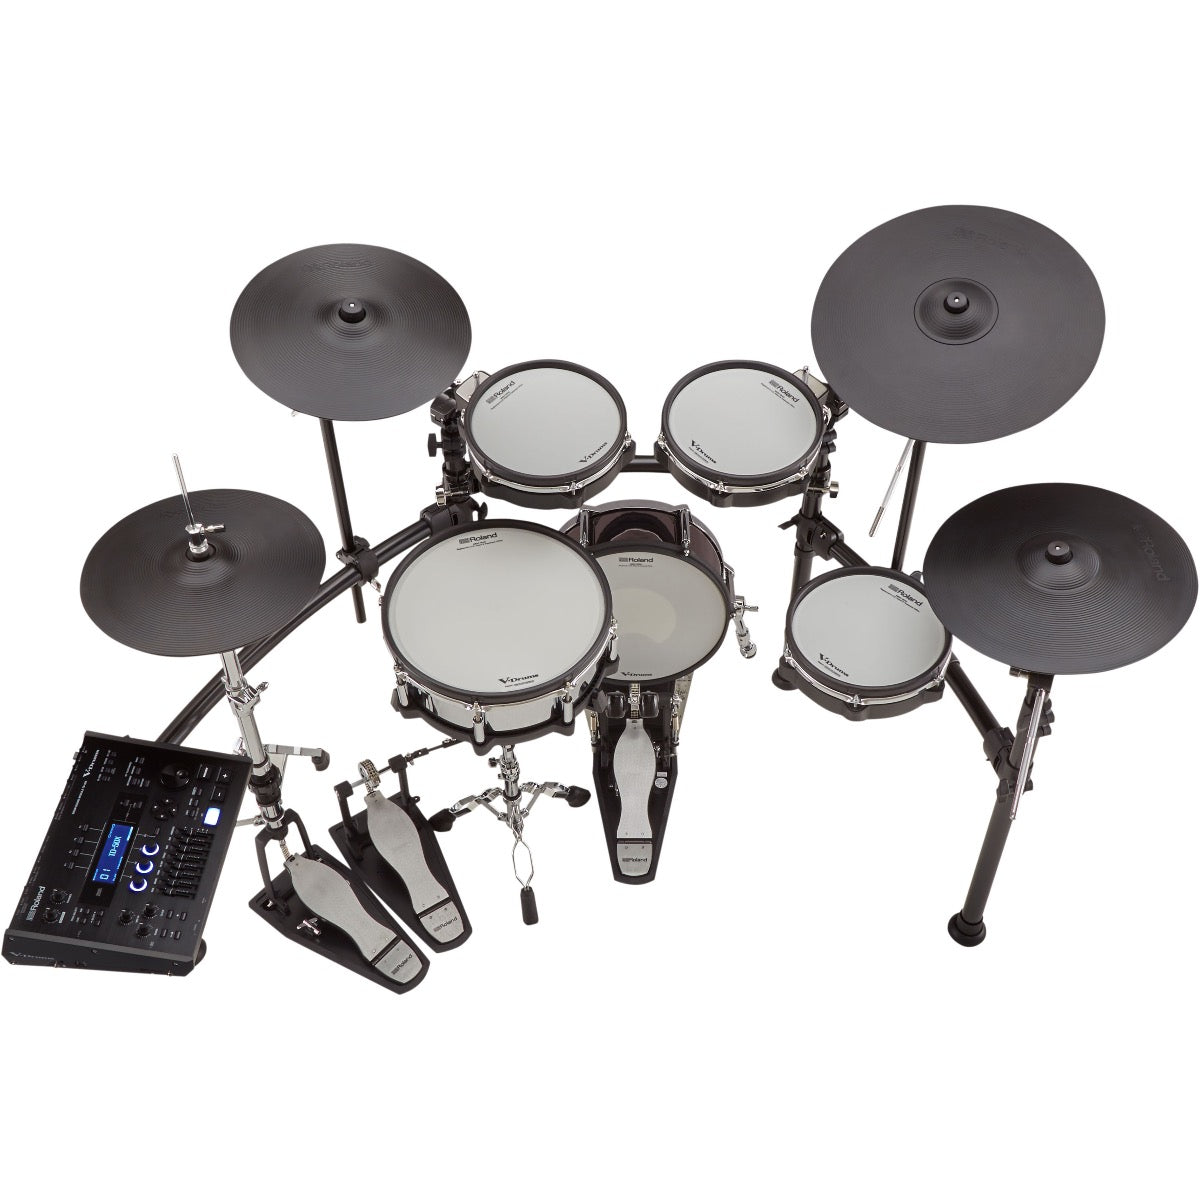 Perspective view of Roland TD-50K2 V-Drums Electronic Drum Set showing top and back